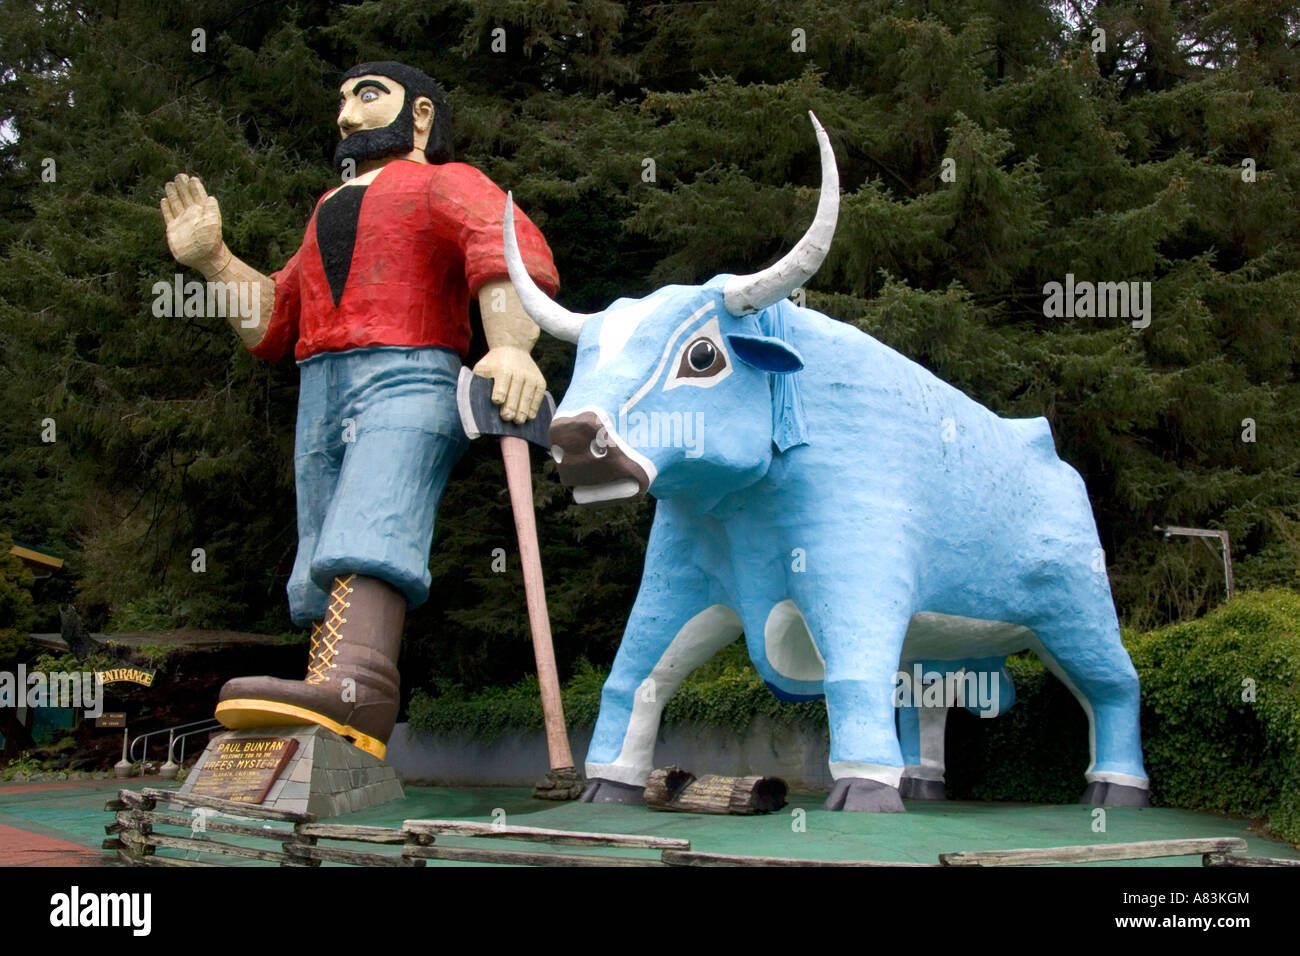 Giant statues of Paul Bunyan and Babe the Blue Ox guard the entrance of Trees of Mystery in Klamath California Stock Photo